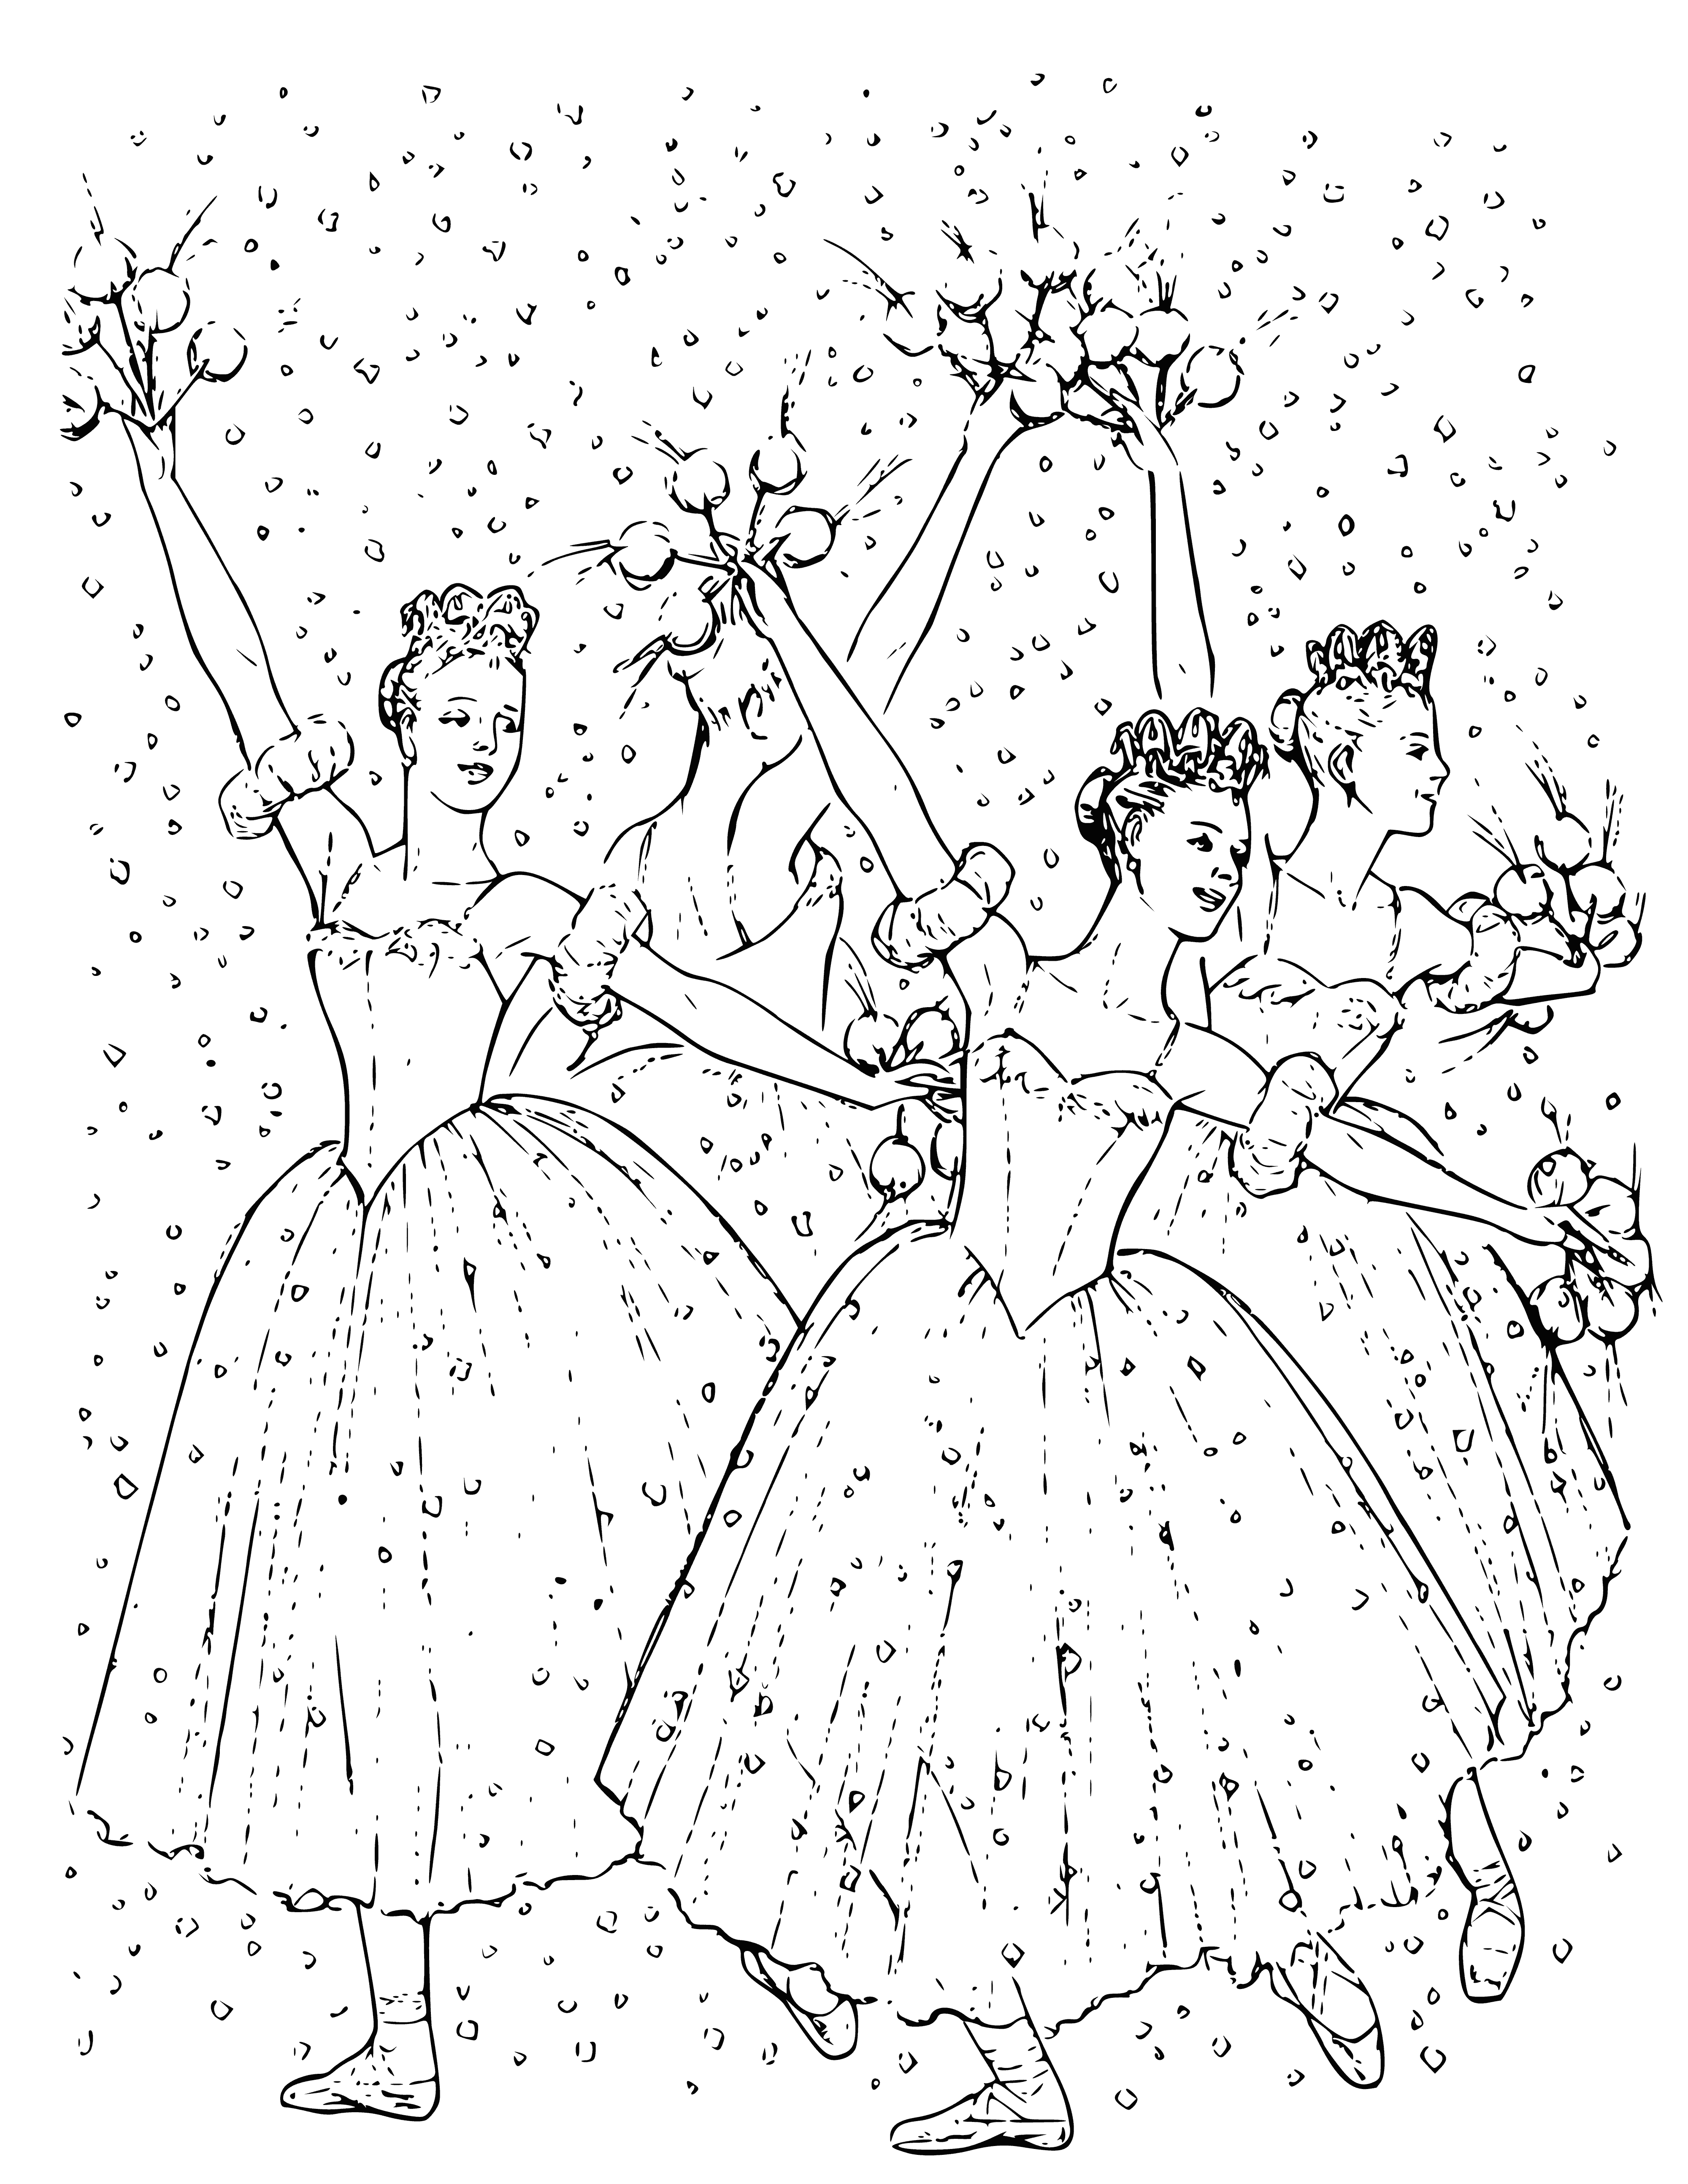 coloring page: A classic look in ballet.

Ballerinas in long puffy skirts: classic look in ballet.